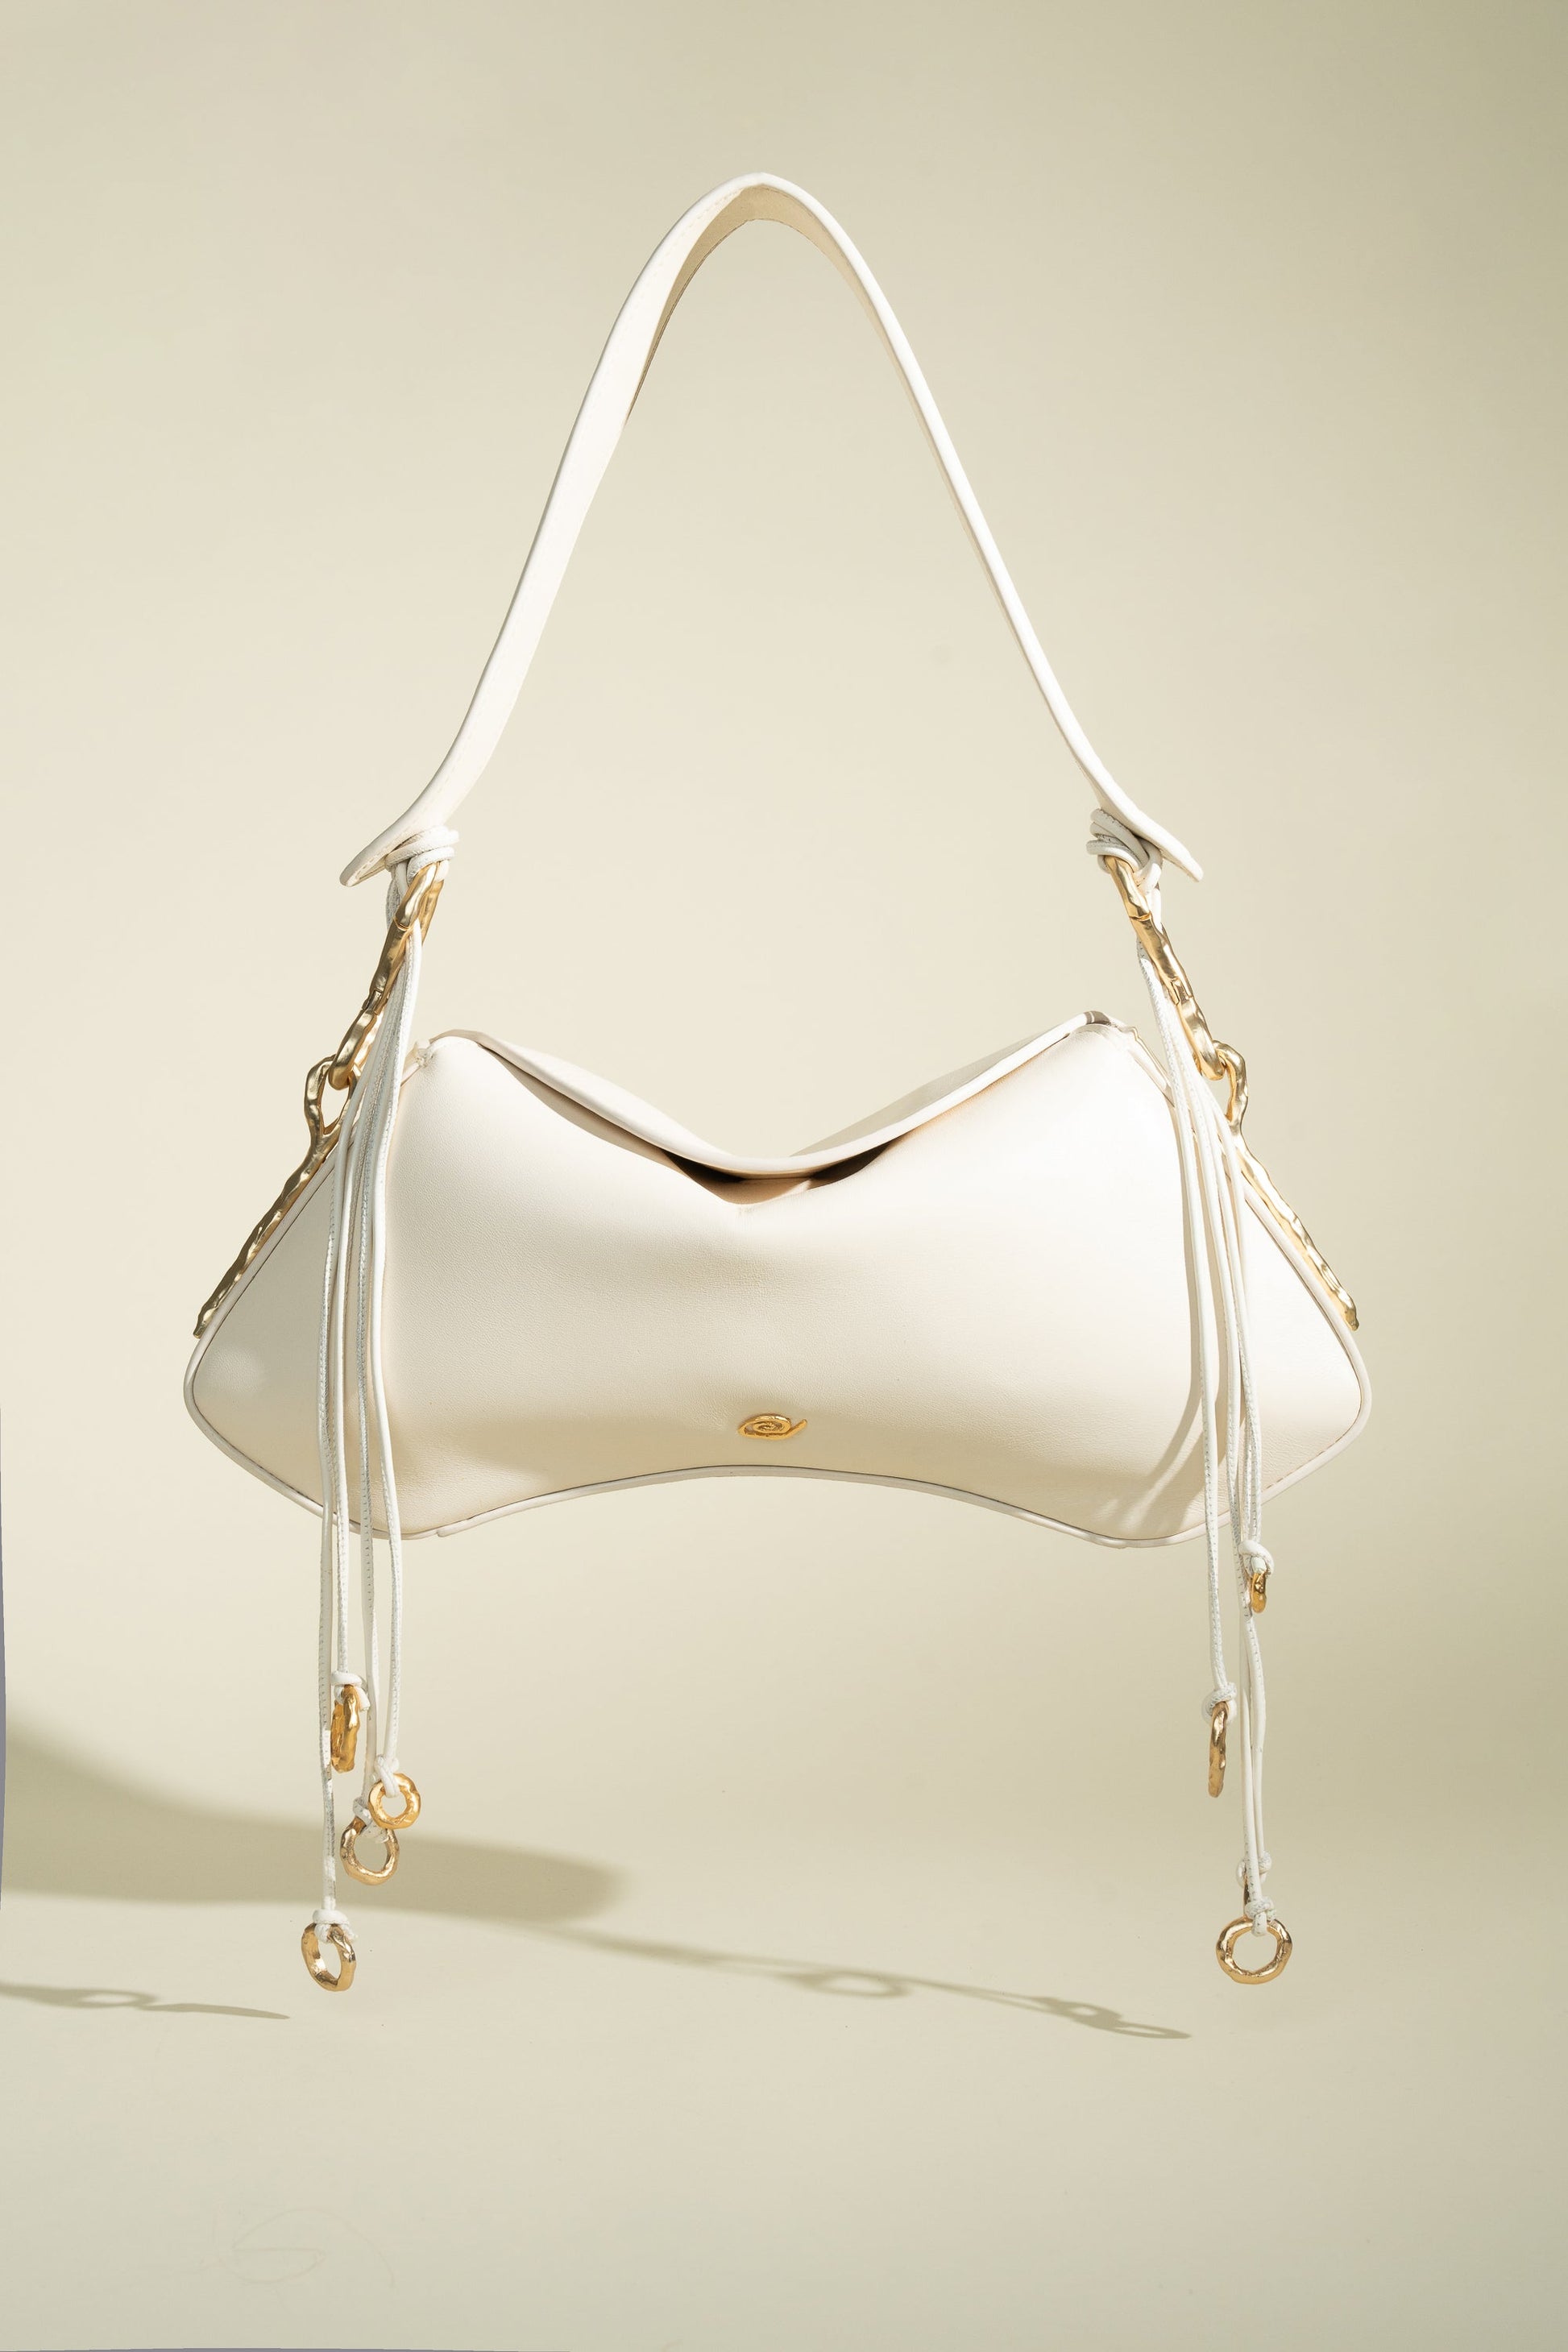  Deià handmade Nappa Leather Shoulder bag with Hanging Organic Rings senderkis cream front view